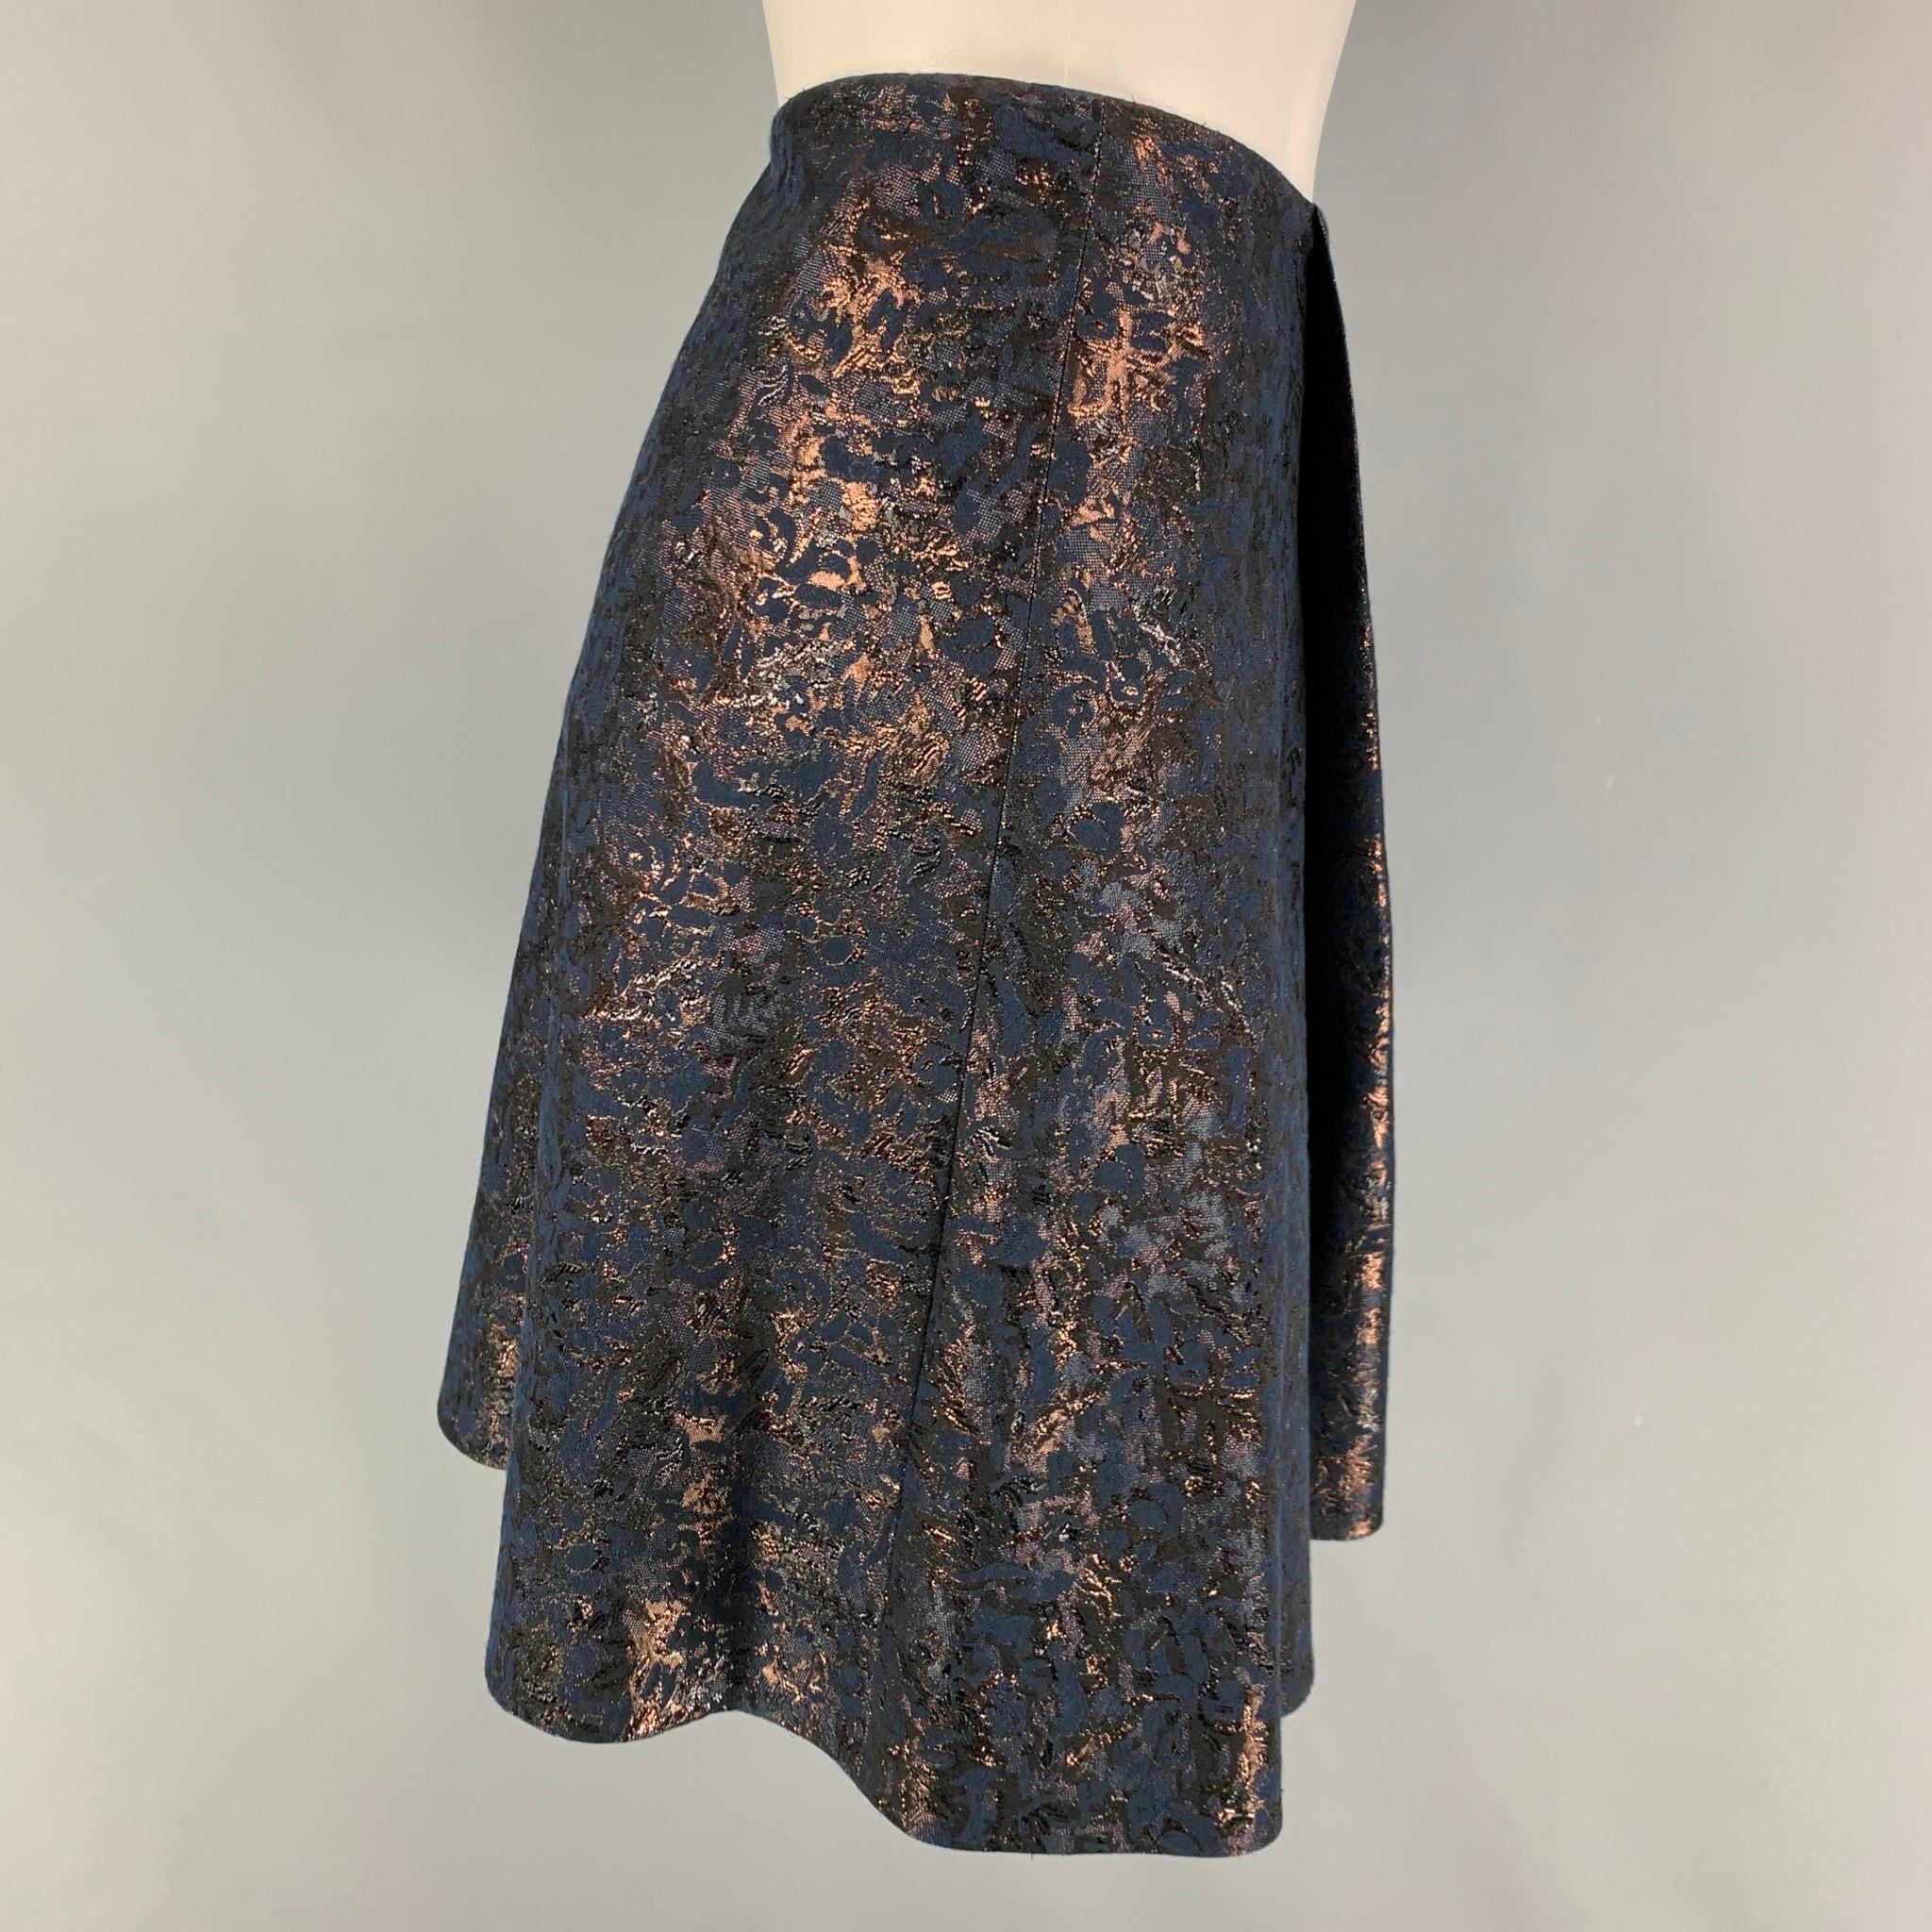 3.1 PHILLIP LIM skirt comes in a navy jacquard cotton featuring a wrap style and a side zipper closure. 

Very Good Pre-Owned Condition.
Marked: 4

Measurements:

Waist: 28 in.
Hip: 38 in.
Length: 18 in. 